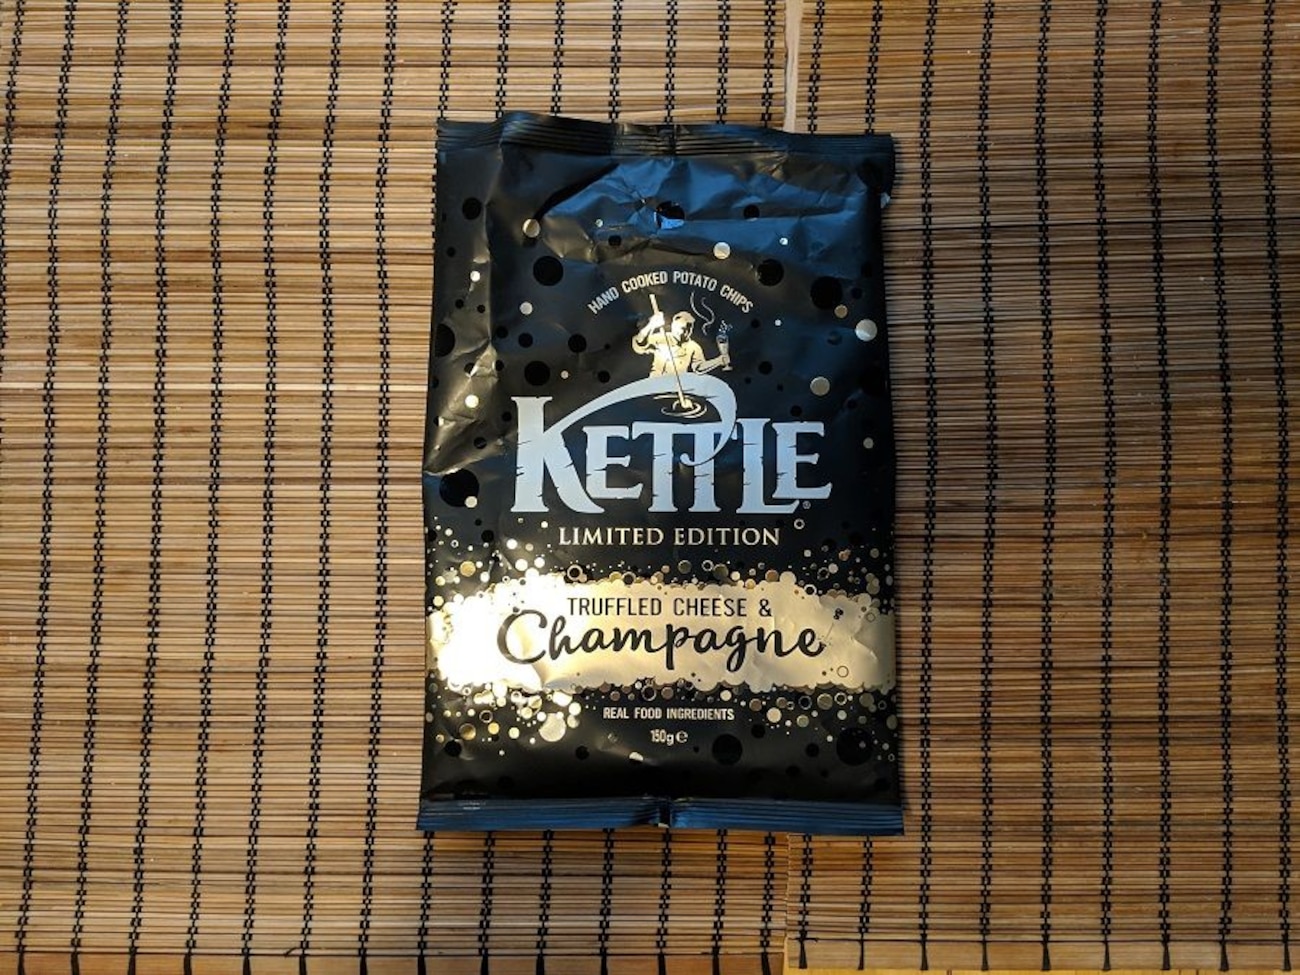 Kettle Limited Edition "Truffled Cheese & Champagne": Perfekte Chips für Silvester!